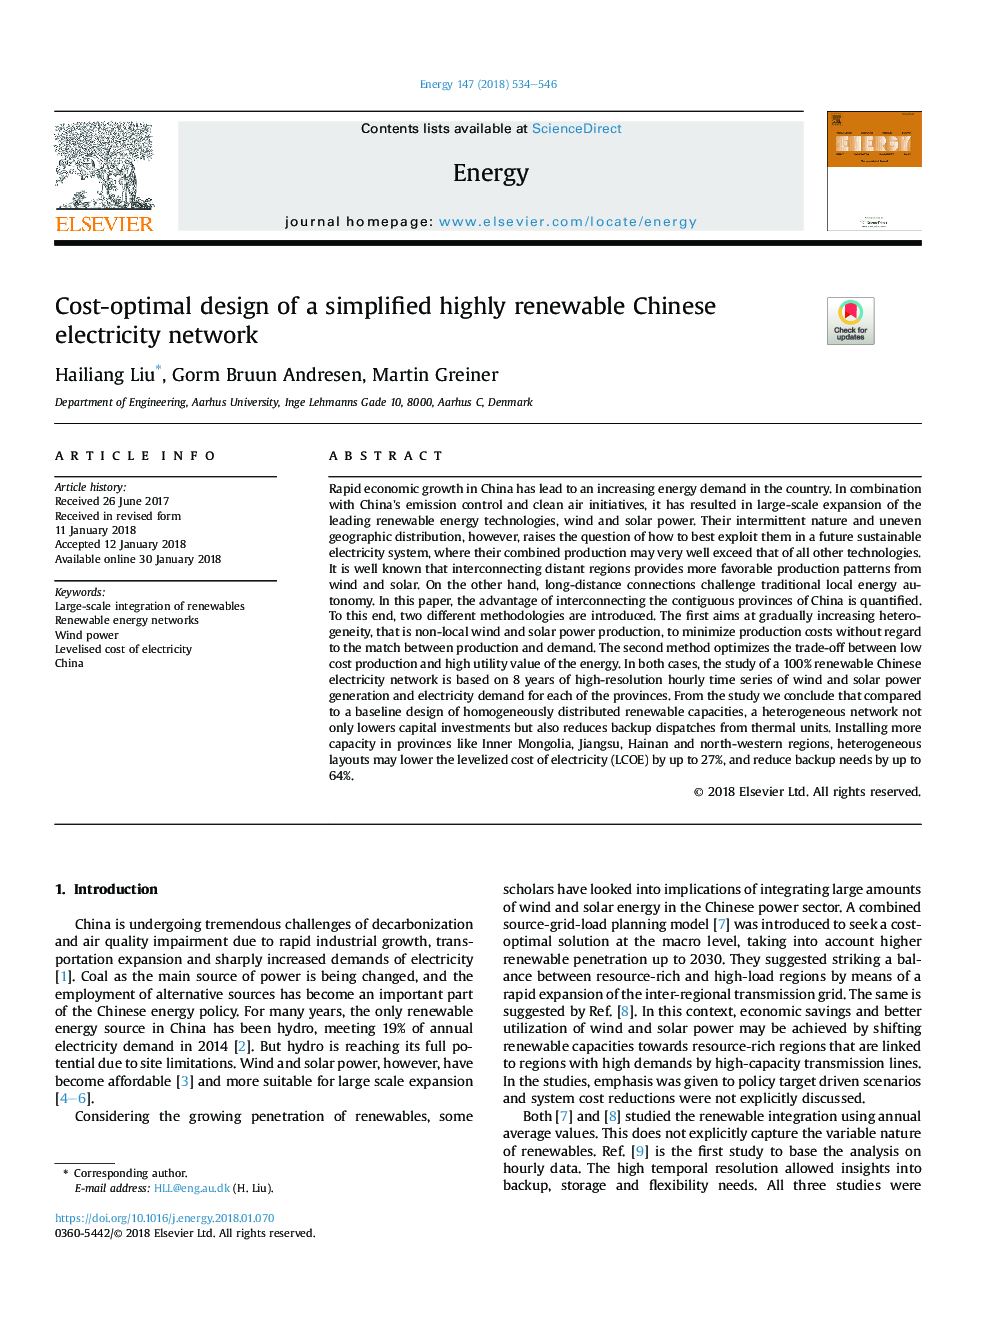 Cost-optimal design of a simplified highly renewable Chinese electricity network